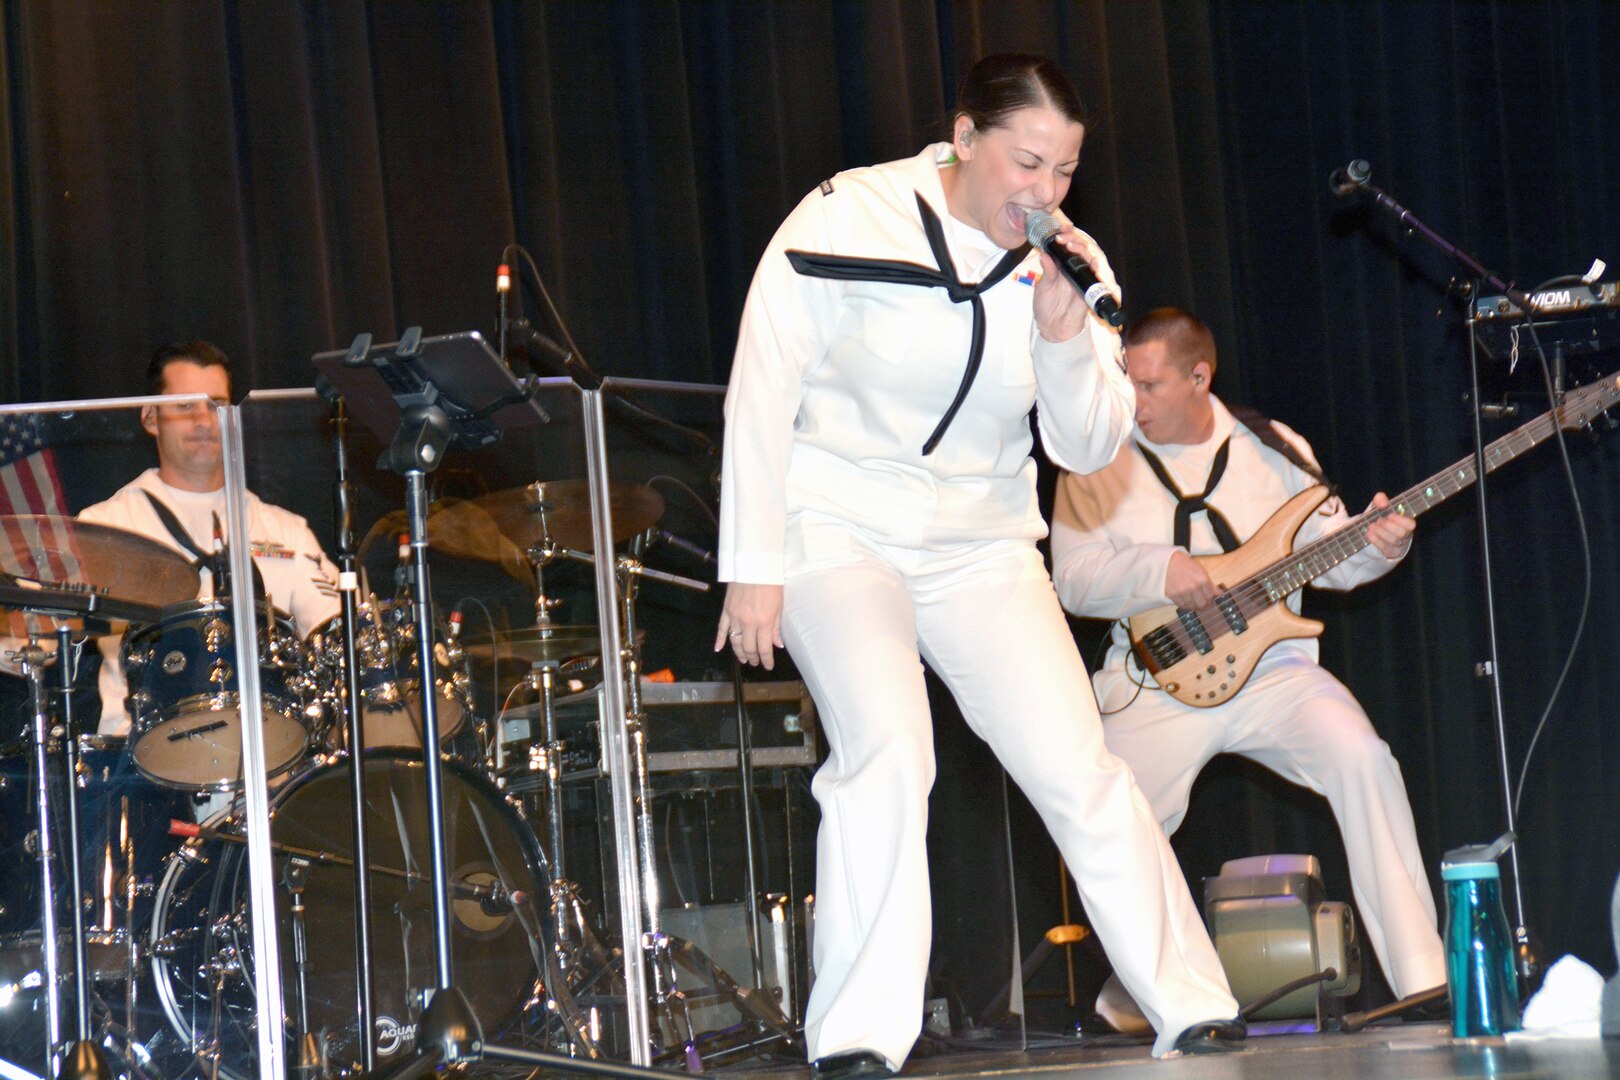 Petty Officer 3rd Class Rachel Shuttleworth of the “Destroyers”, the popular music group of Navy Band Southwest from San Diego, performs for students of Winston Churchill High School during Fiesta San Antonio 2017. The “Destroyers”, along with Sailors from Navy Recruiting District San Antonio and crew members from the USS San Antonio (LPD-17) homeported at Naval Station Norfolk, visited the school to conduct community outreach and spread Navy Awareness.